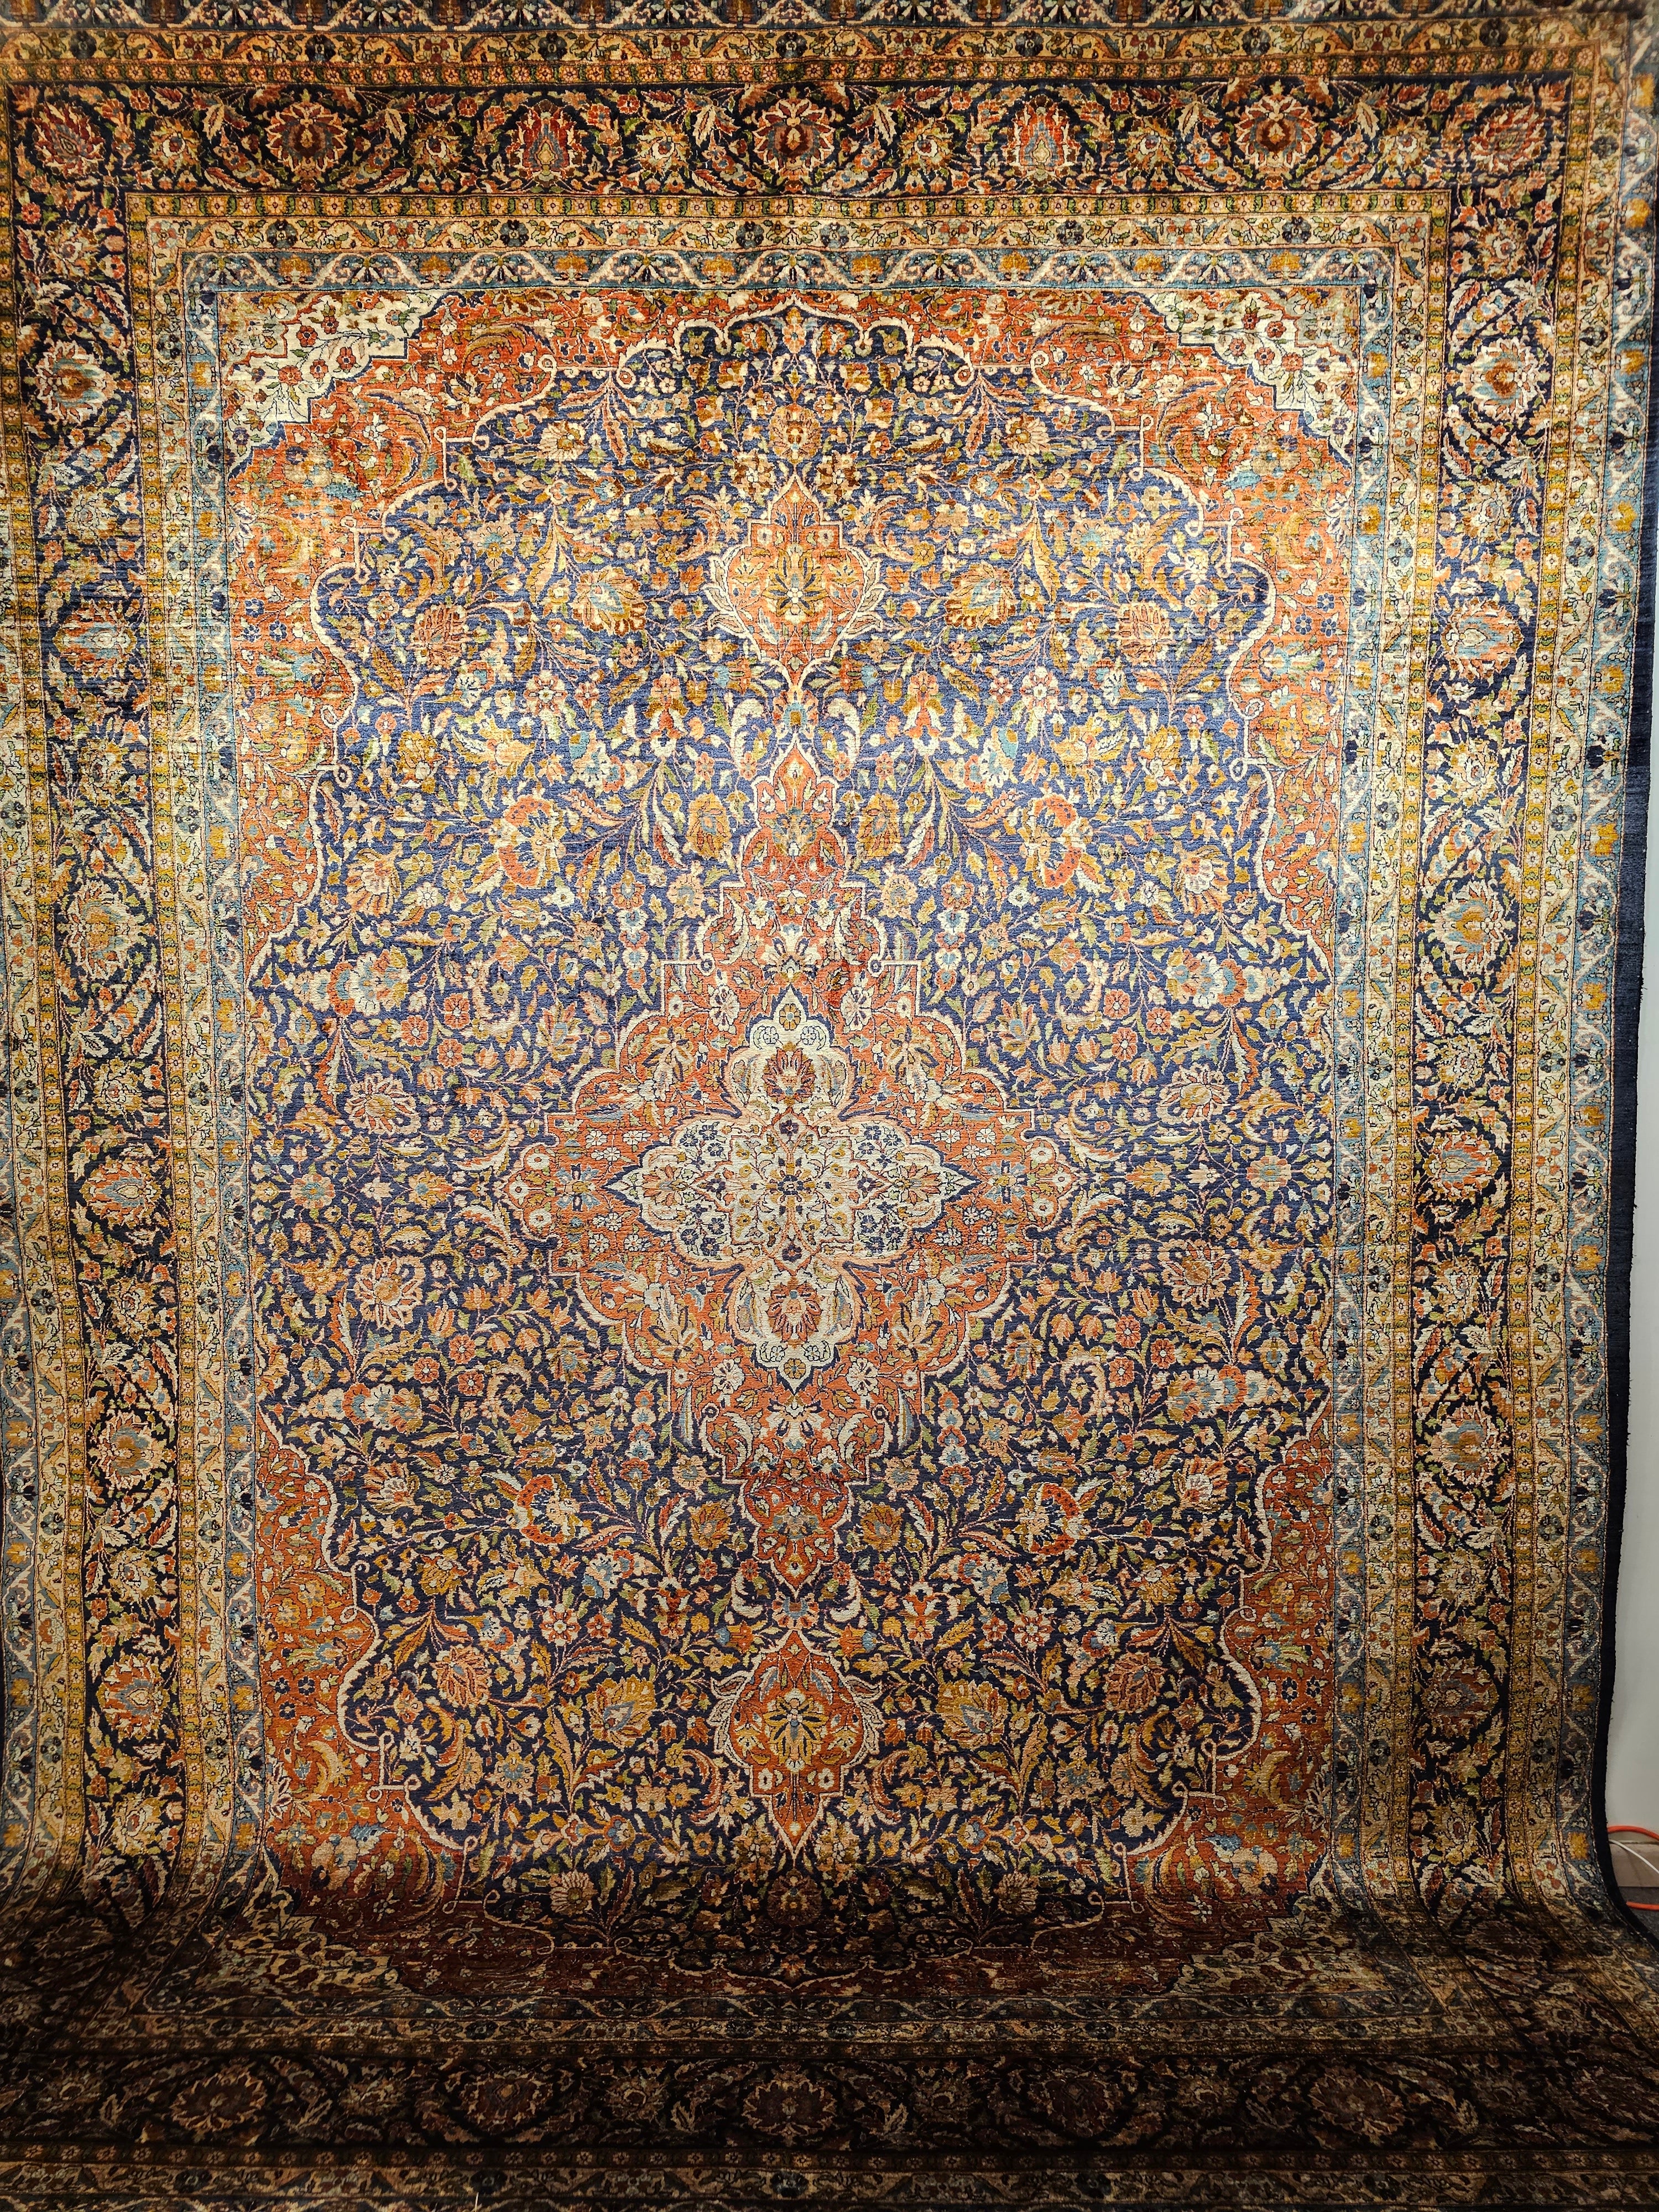 Vintage Persian silk Tabriz room size rug in a floral pattern with brilliant colors from the 3rd quarter of the 1900s.  The rug has a beautiful design and great silk color combination that shimmers under light.  It was hand woven at one of the city